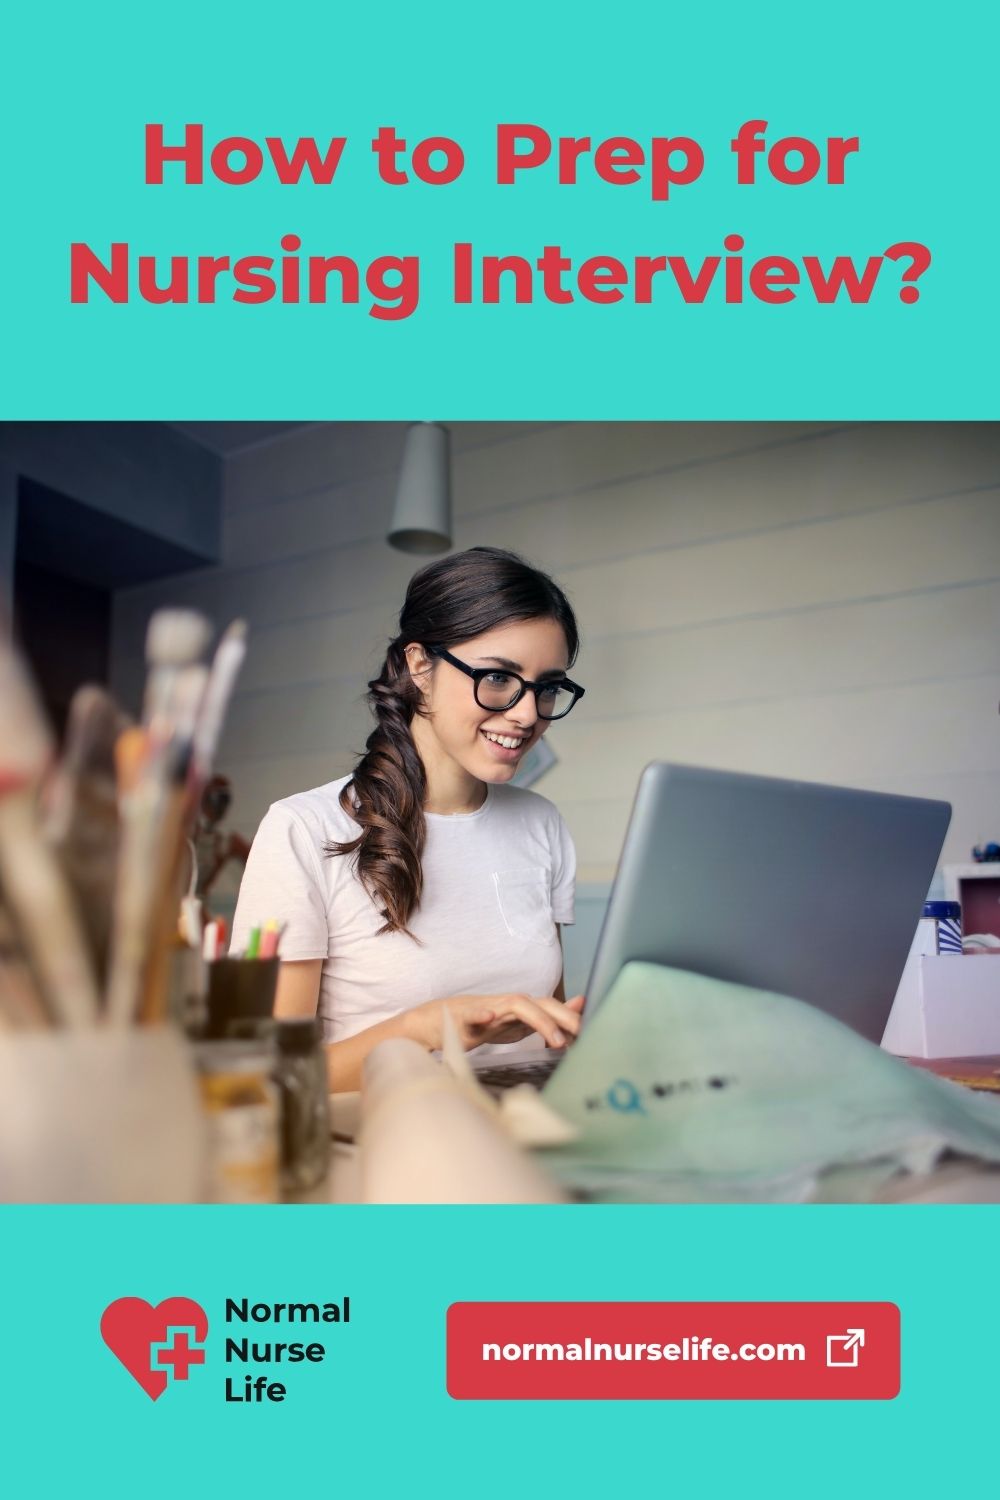 How to prepare for a nursing interview